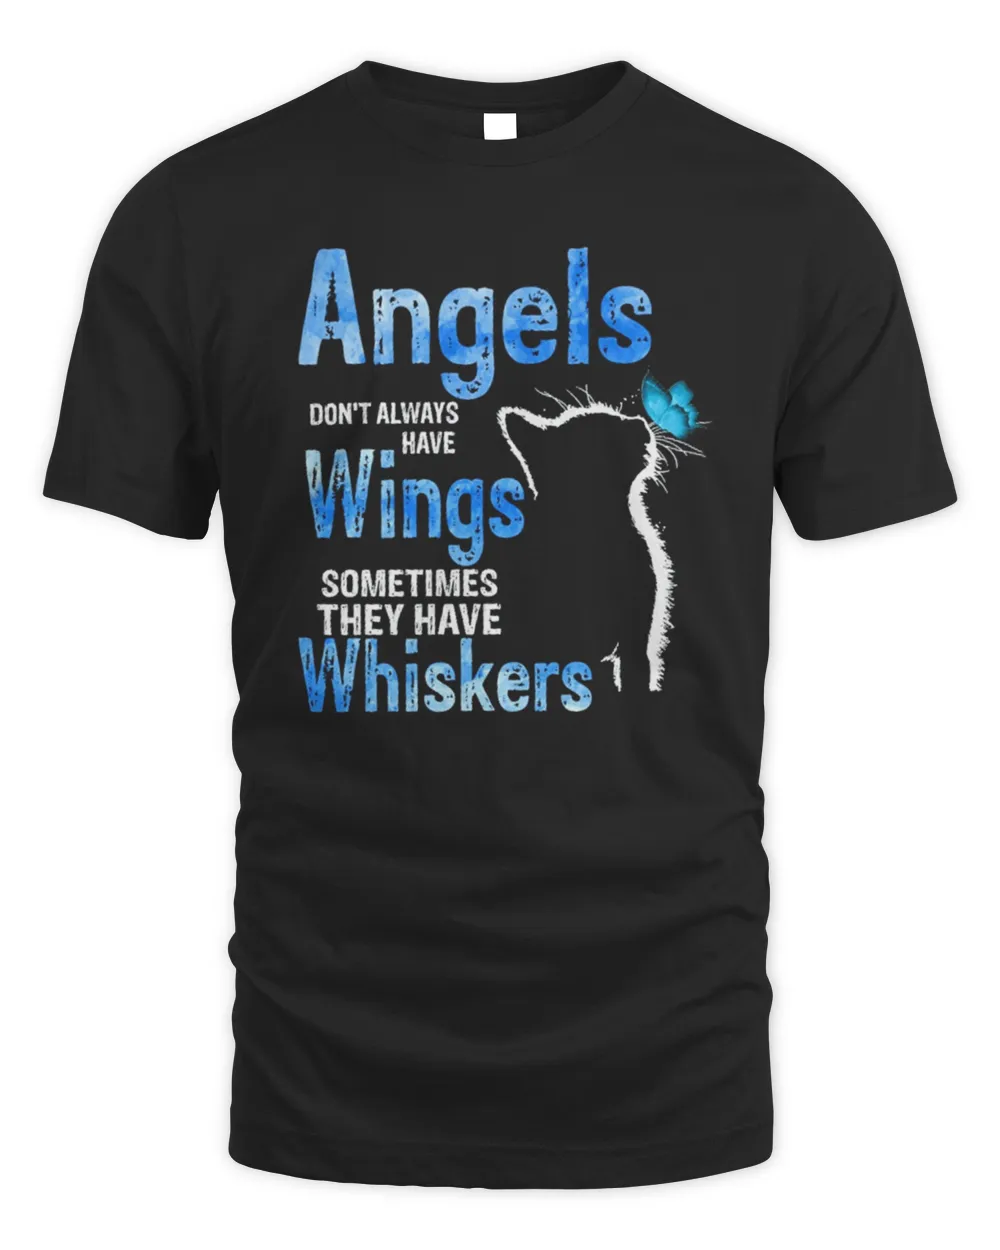 Angels Don't Always Have Wings Sometimes They Have Whiskers Cat Shirt Unisex Standard T-Shirt black xl